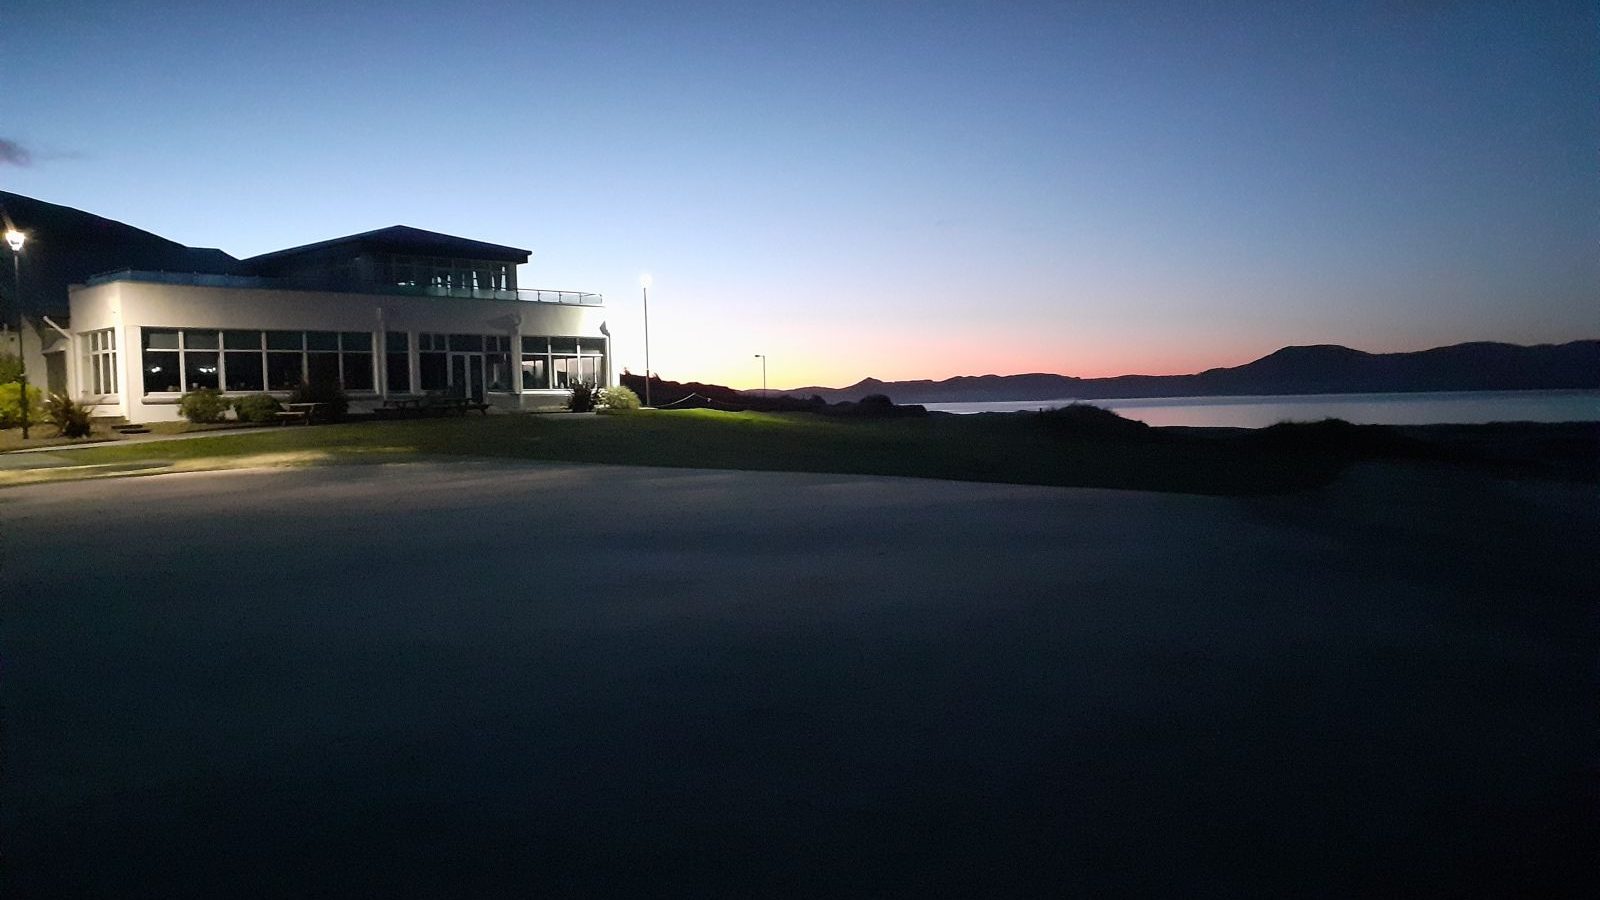 clubhouse at dusk